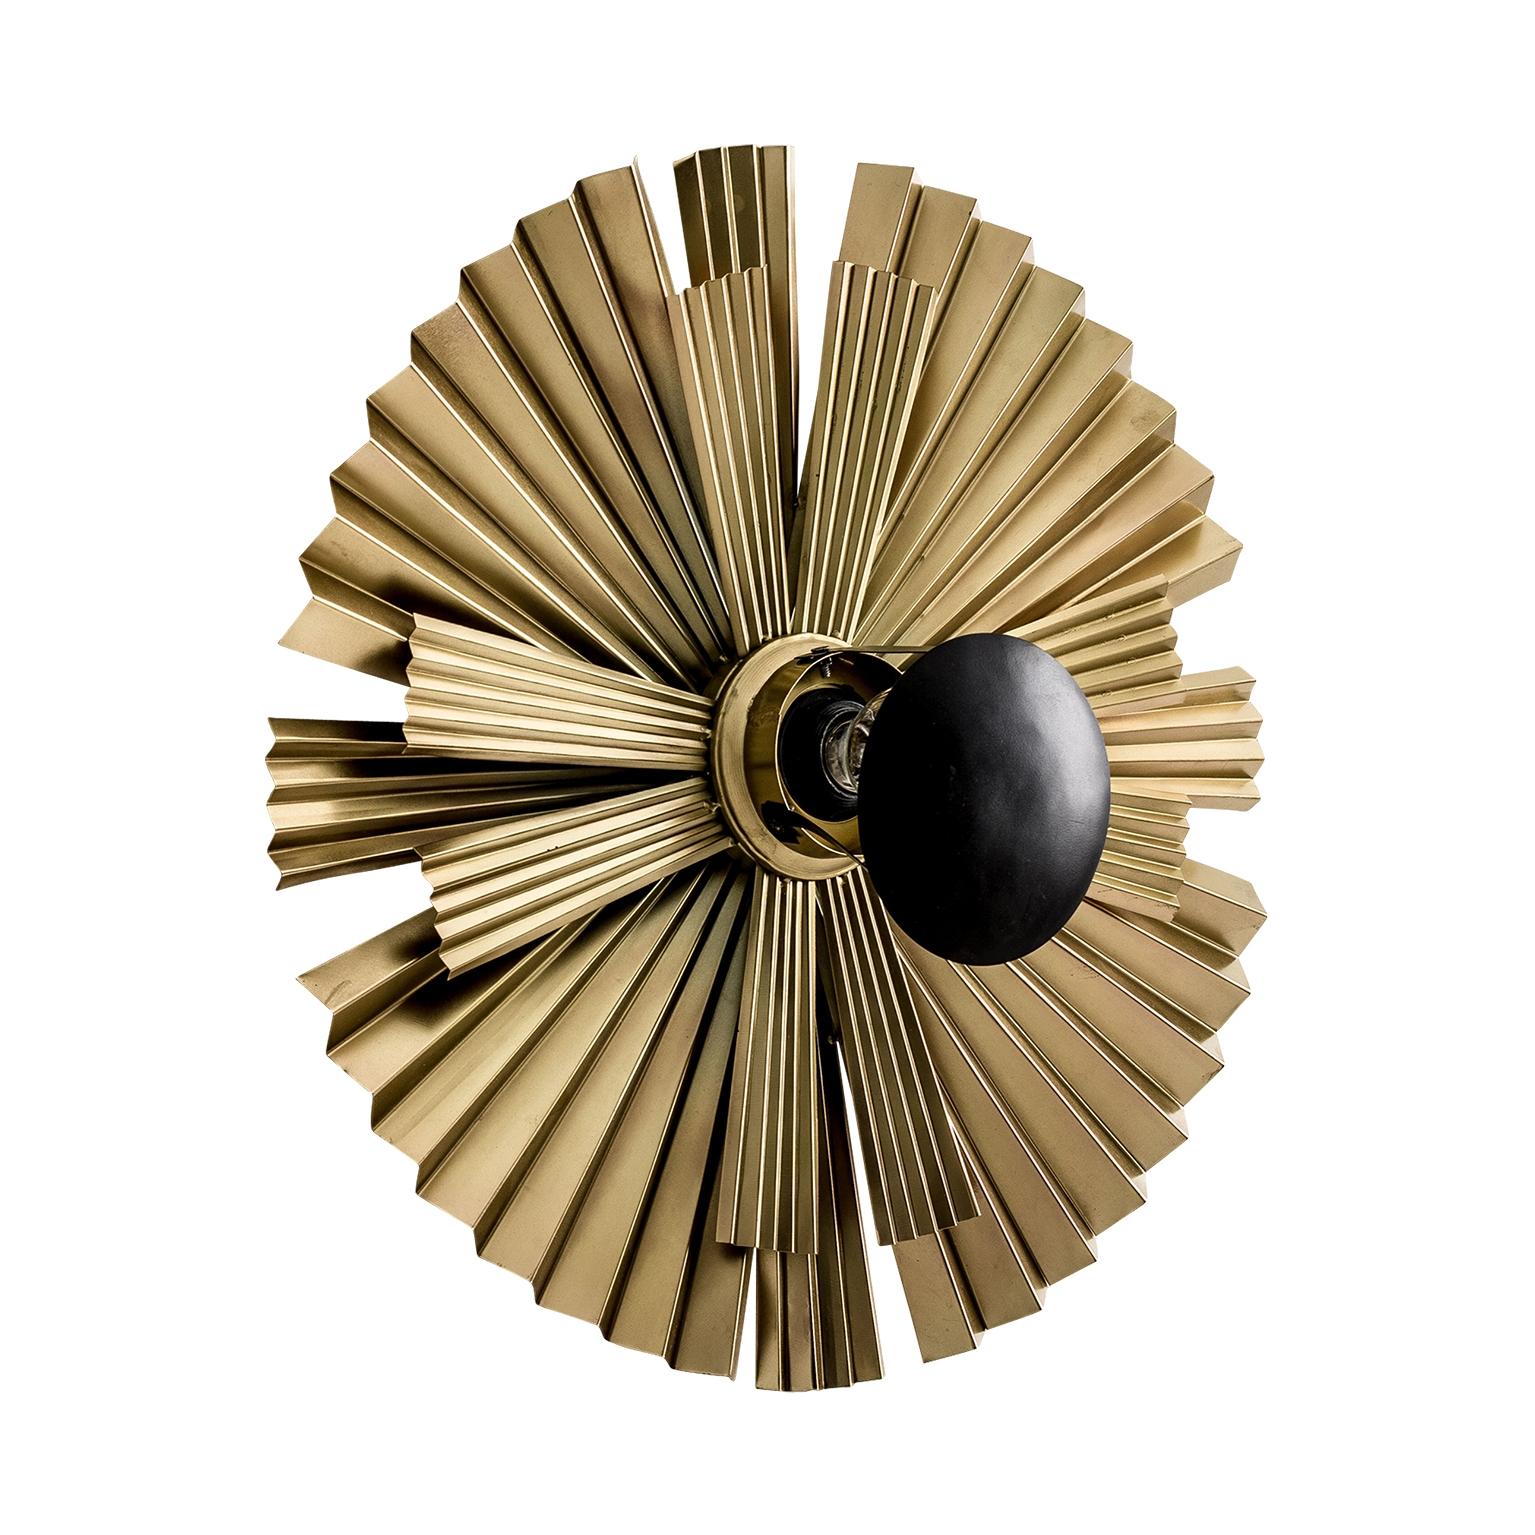 Gold and black lacquer finish metal wall lights composed of an aerial and round metal structure.